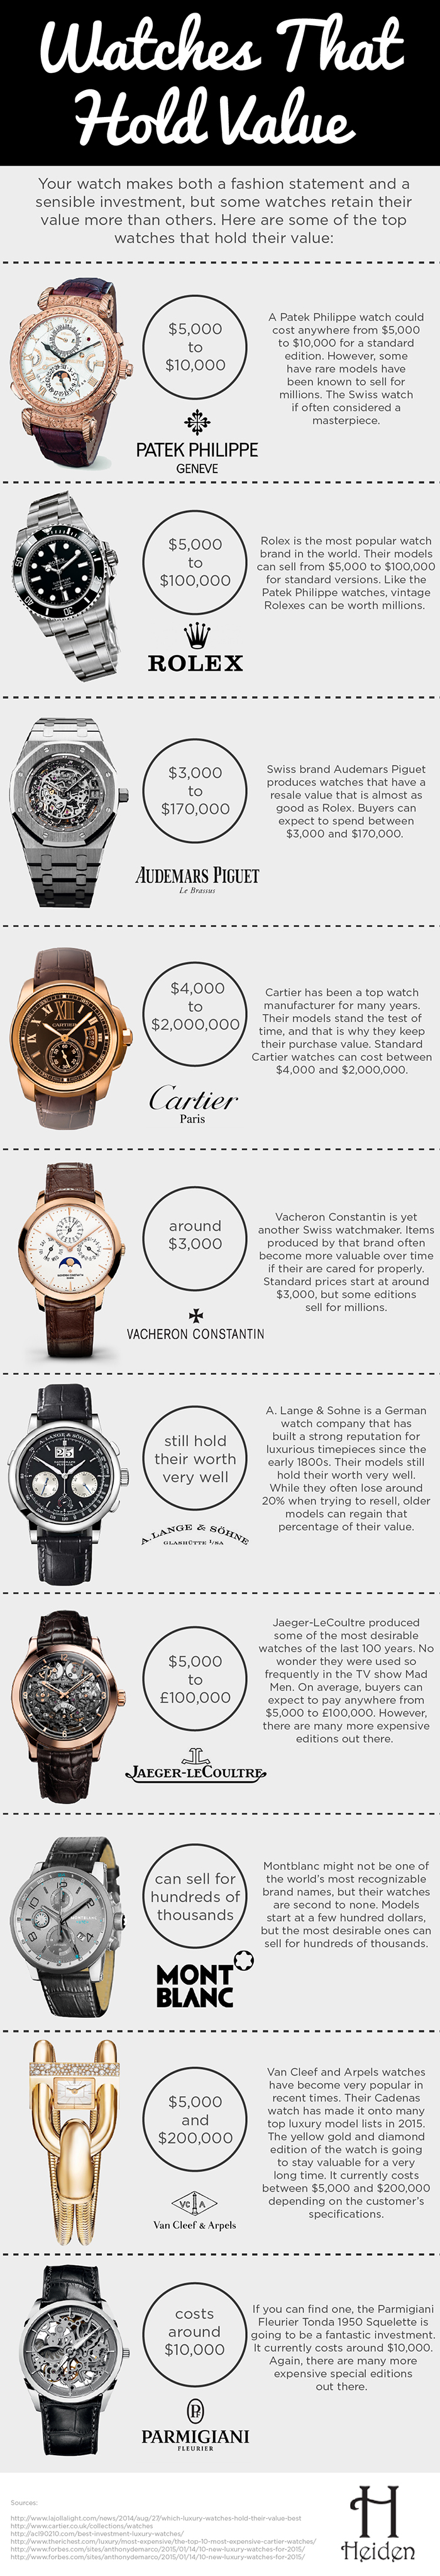 Which companies have the best resale value of watches? - Quora